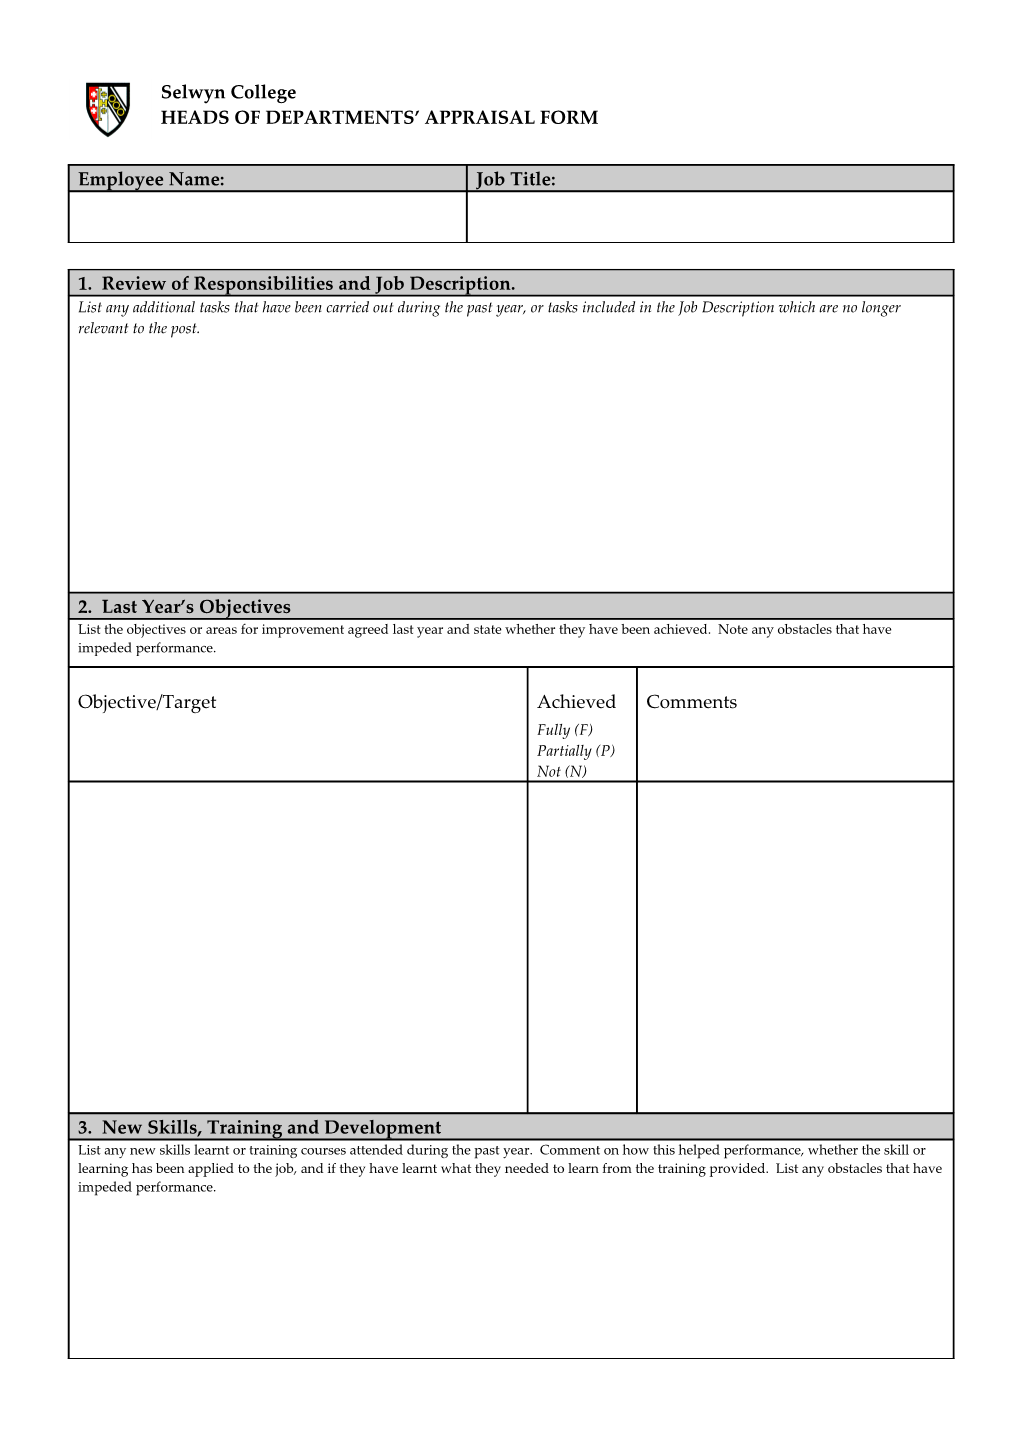 Technical, Clerical and General Support Staff Appraisal Form